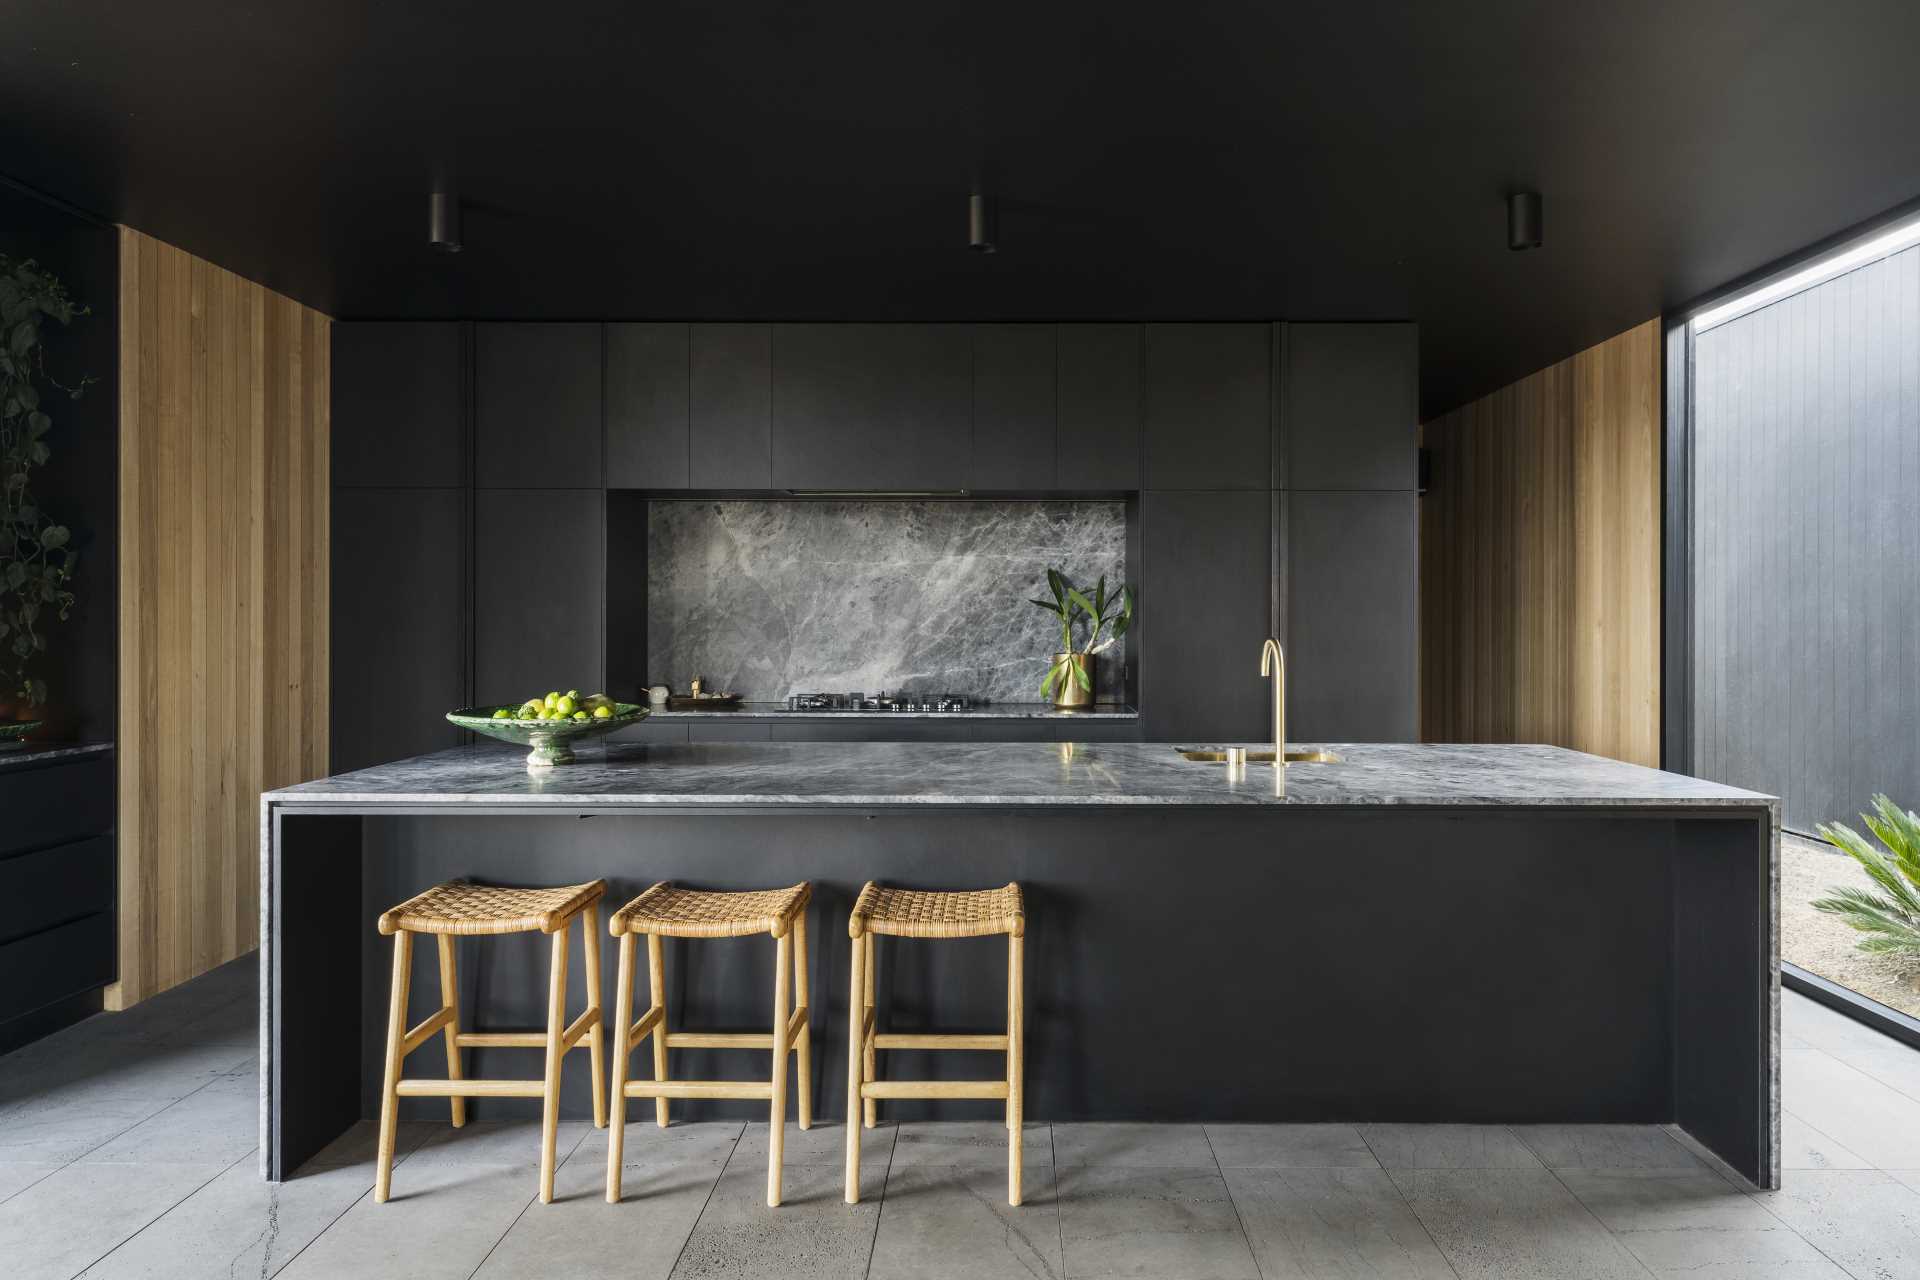 A modern black kitchen with minimalist cabinets, brass accents, and a long island.